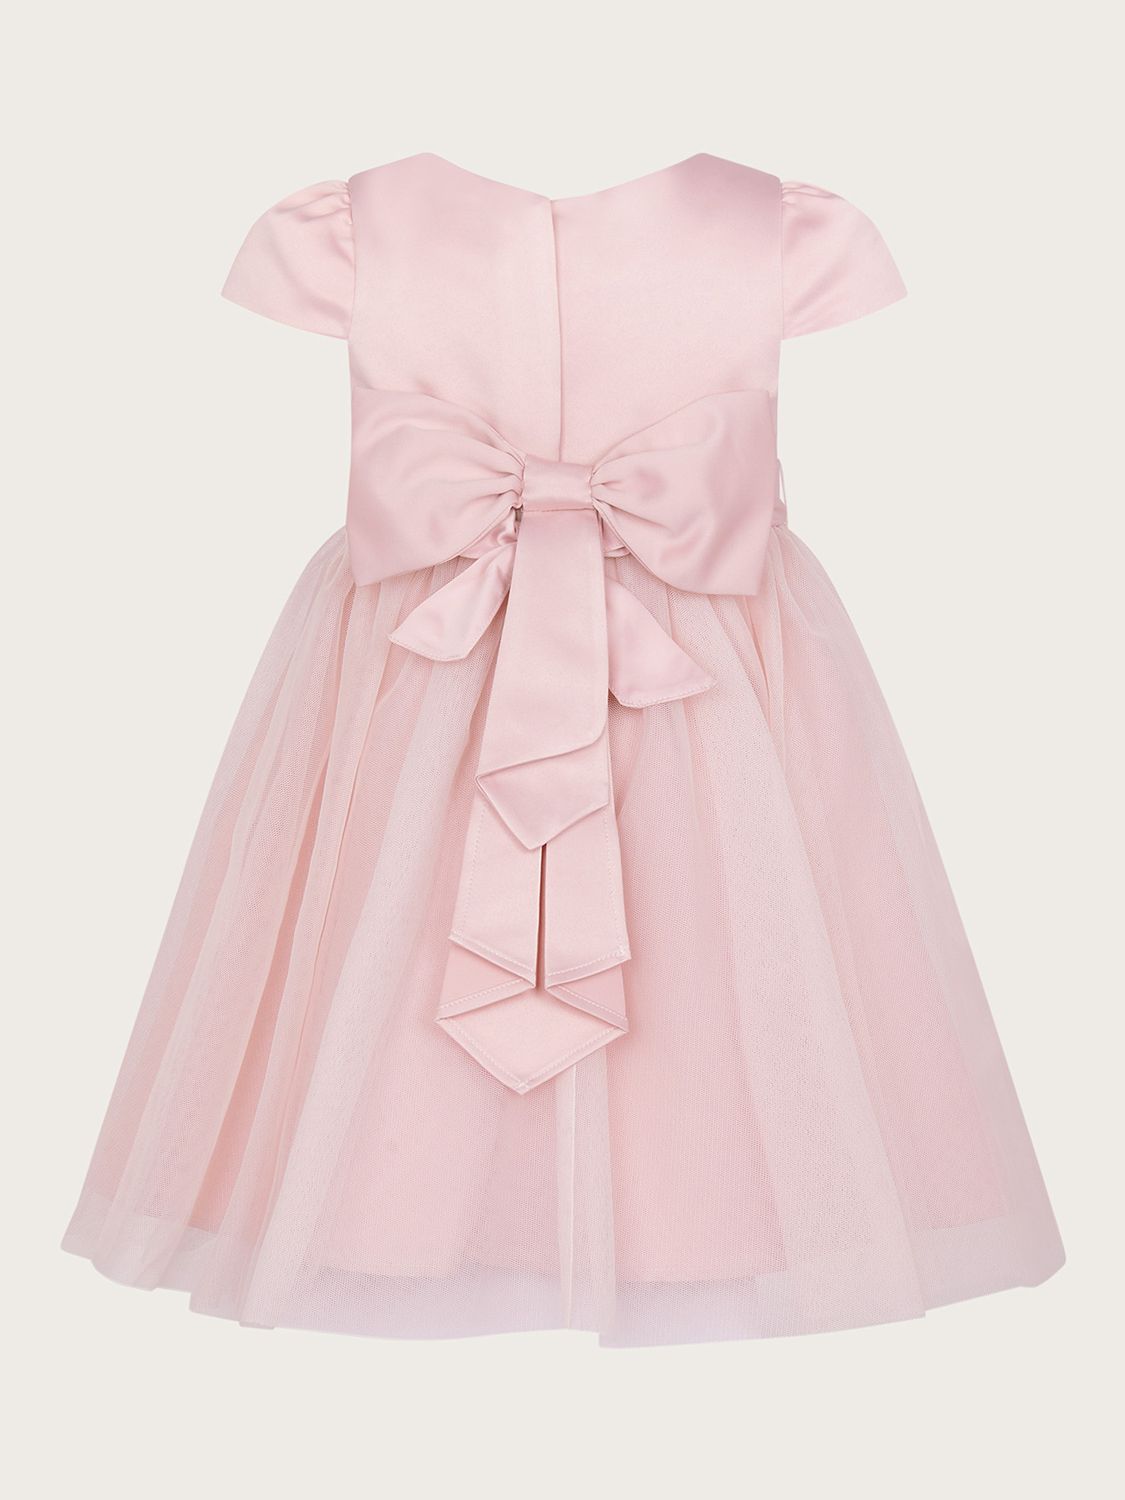 Buy Monsoon Baby Sew Tulle Bridesmaids Dress Online at johnlewis.com